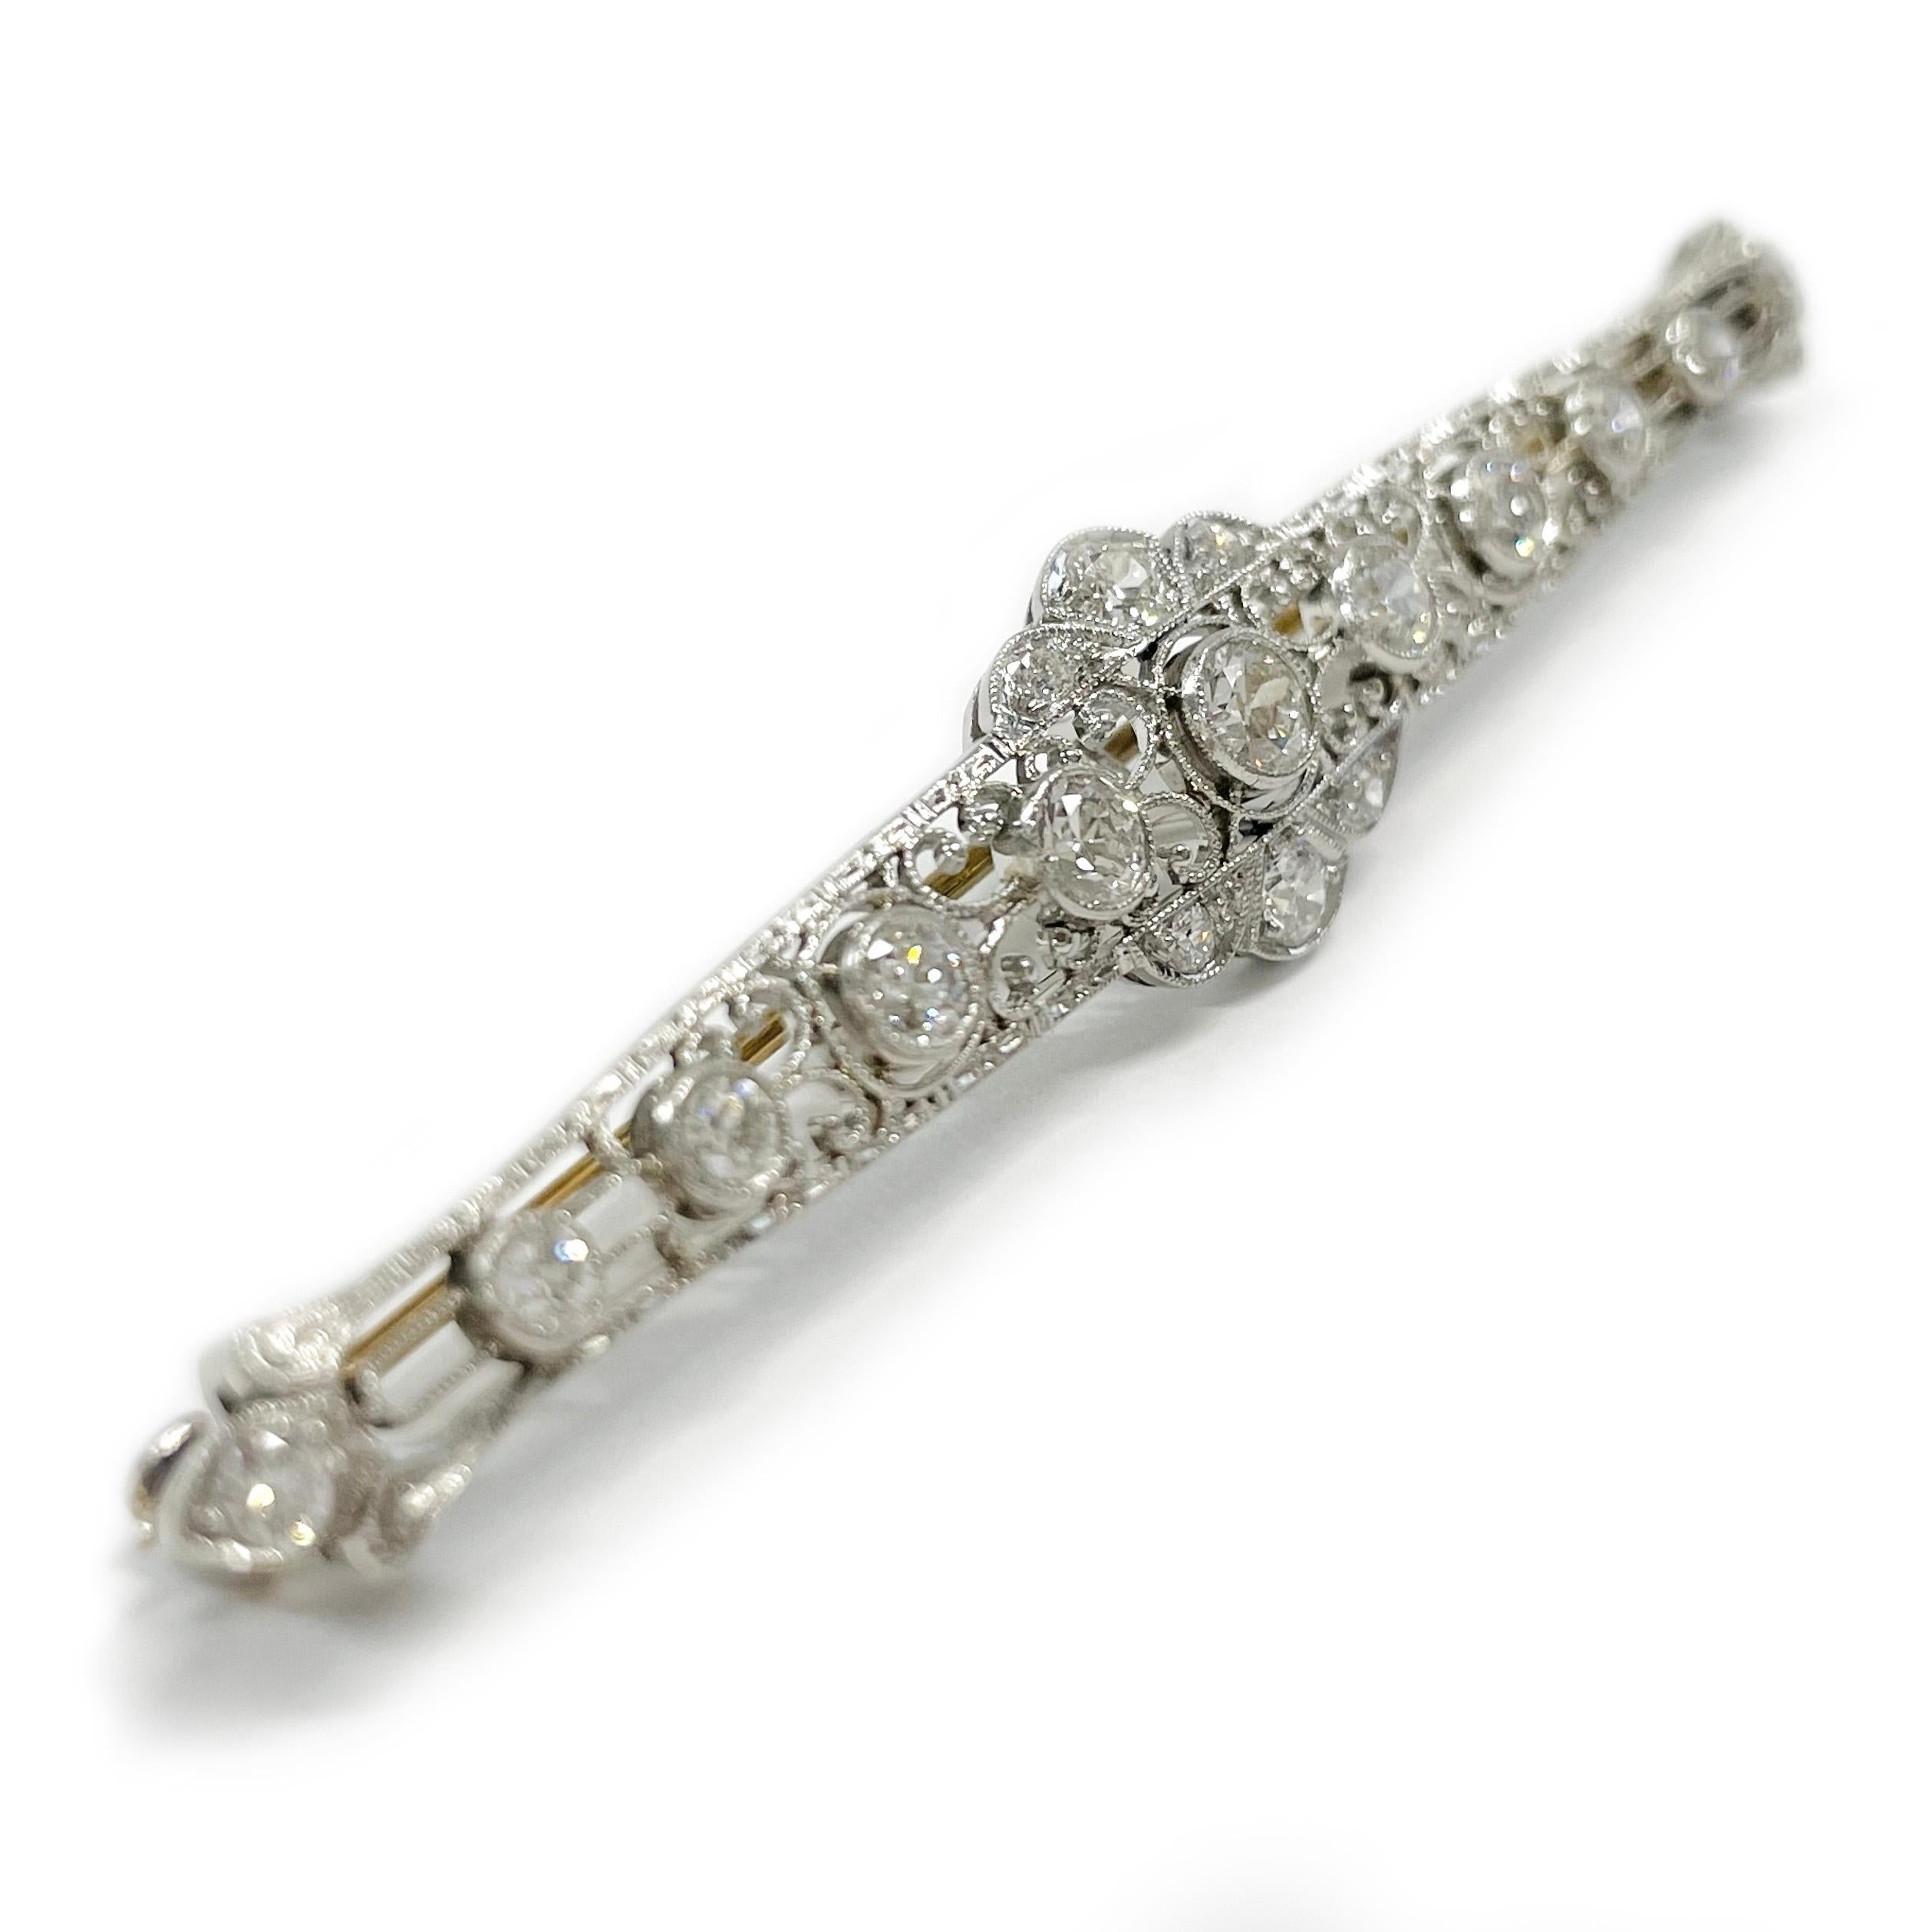 Art Deco Platinum Diamond Bar Brooch/Pin. This absolutely gorgeous pin features seventeen round diamonds, nine graduate diamonds are bezel set across the center and eight are bead set. This lovely piece offers intricate milgrain detail. There is one